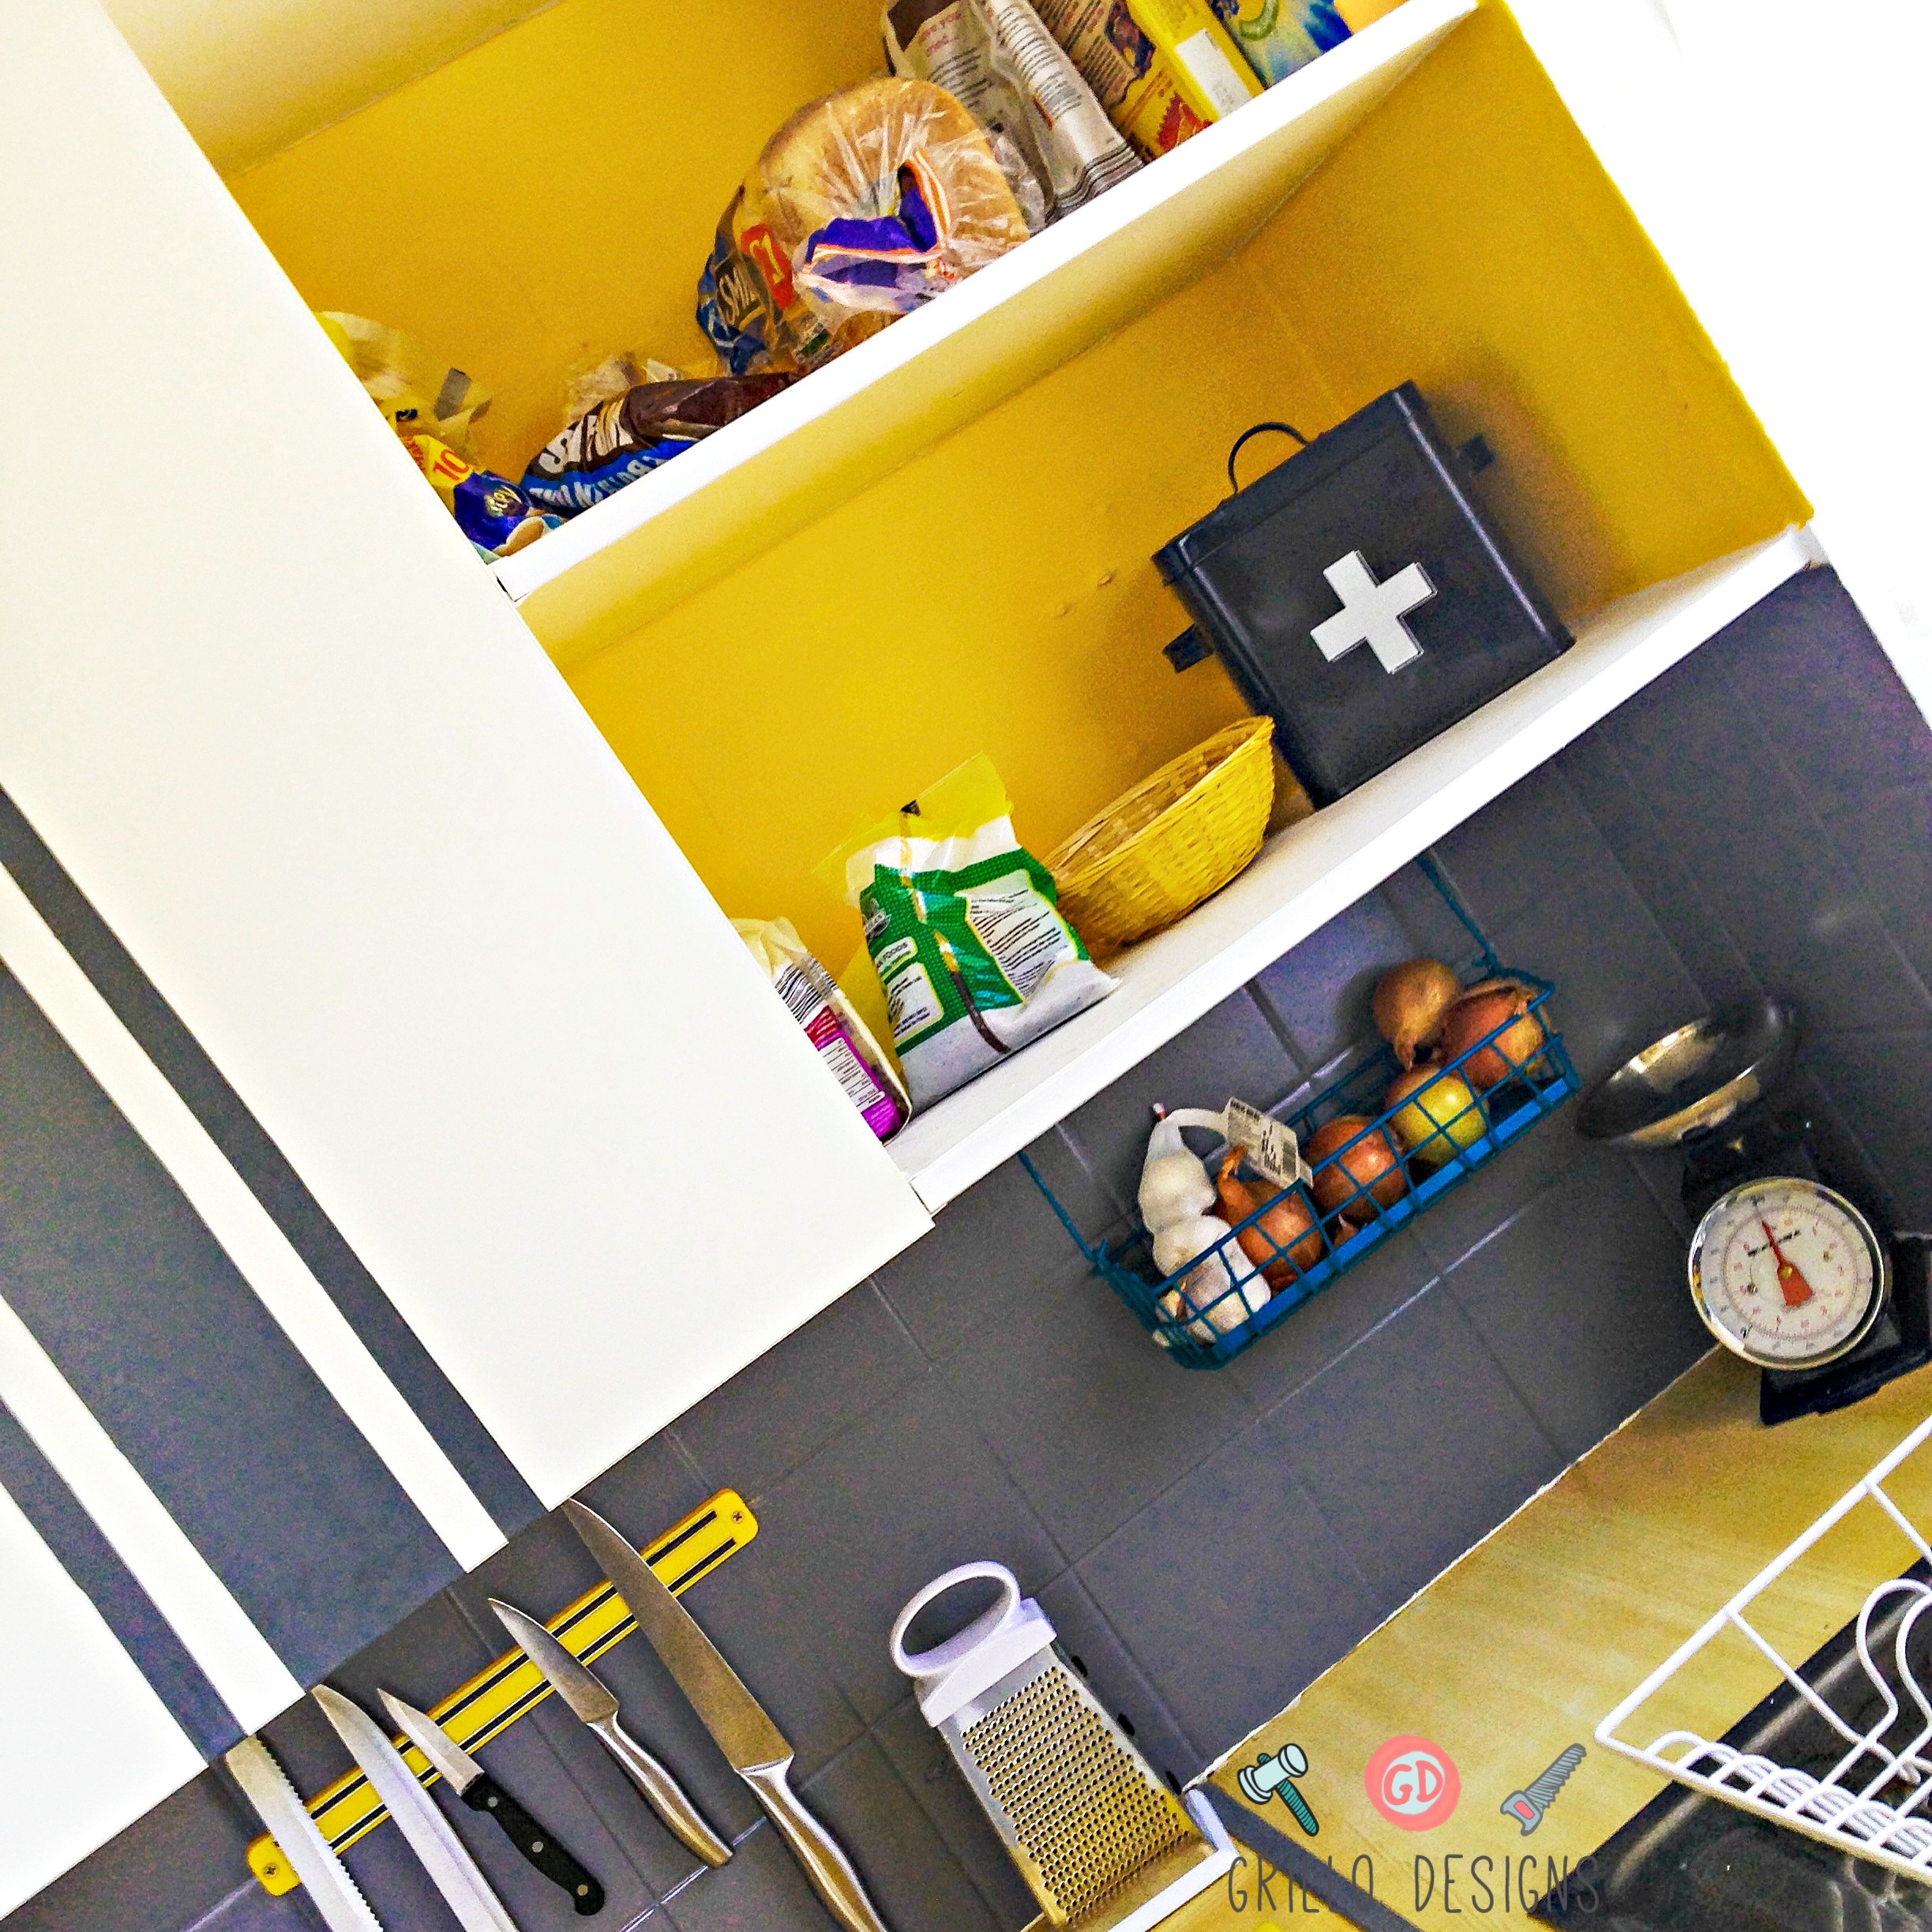 Cabinets turned to open shelving and painted white and yellow